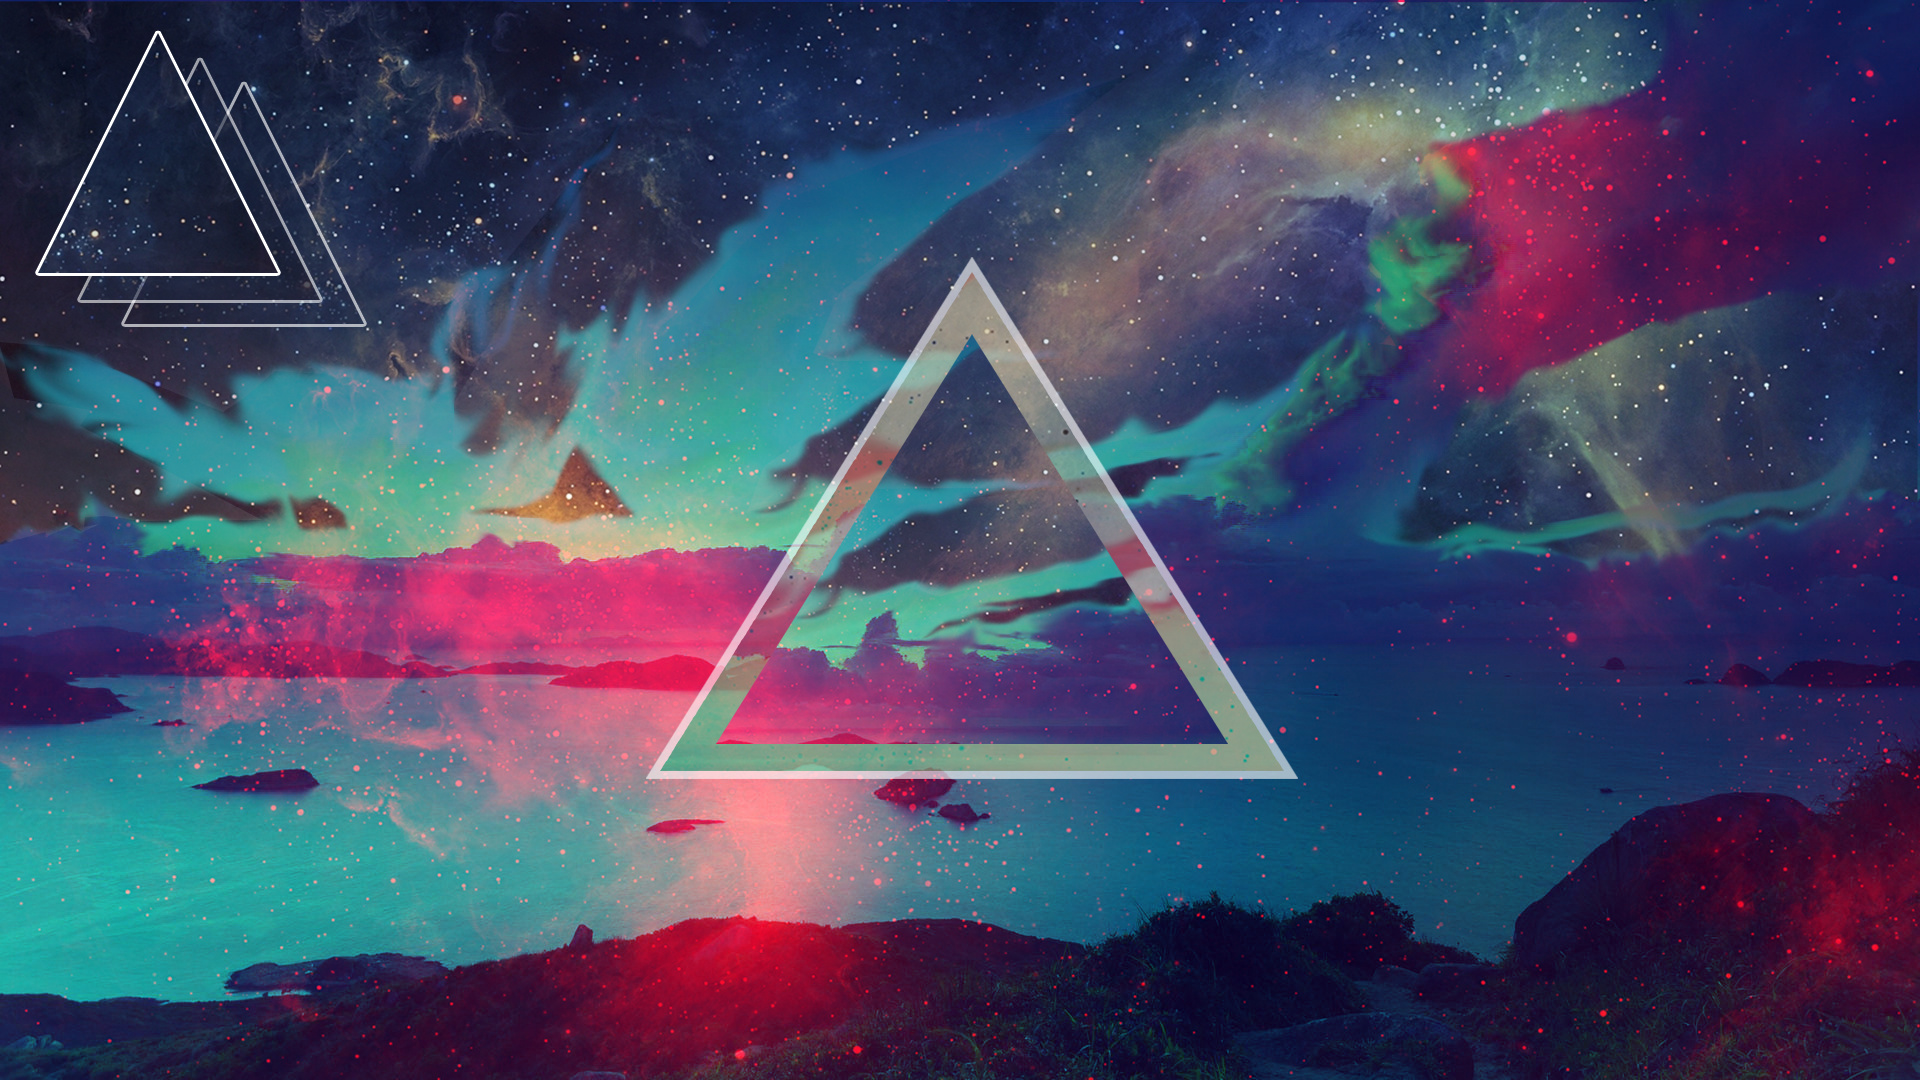 Hipster triangle, geometric design, abstract art, indie culture, visual flavor, 1920x1080 Full HD Desktop